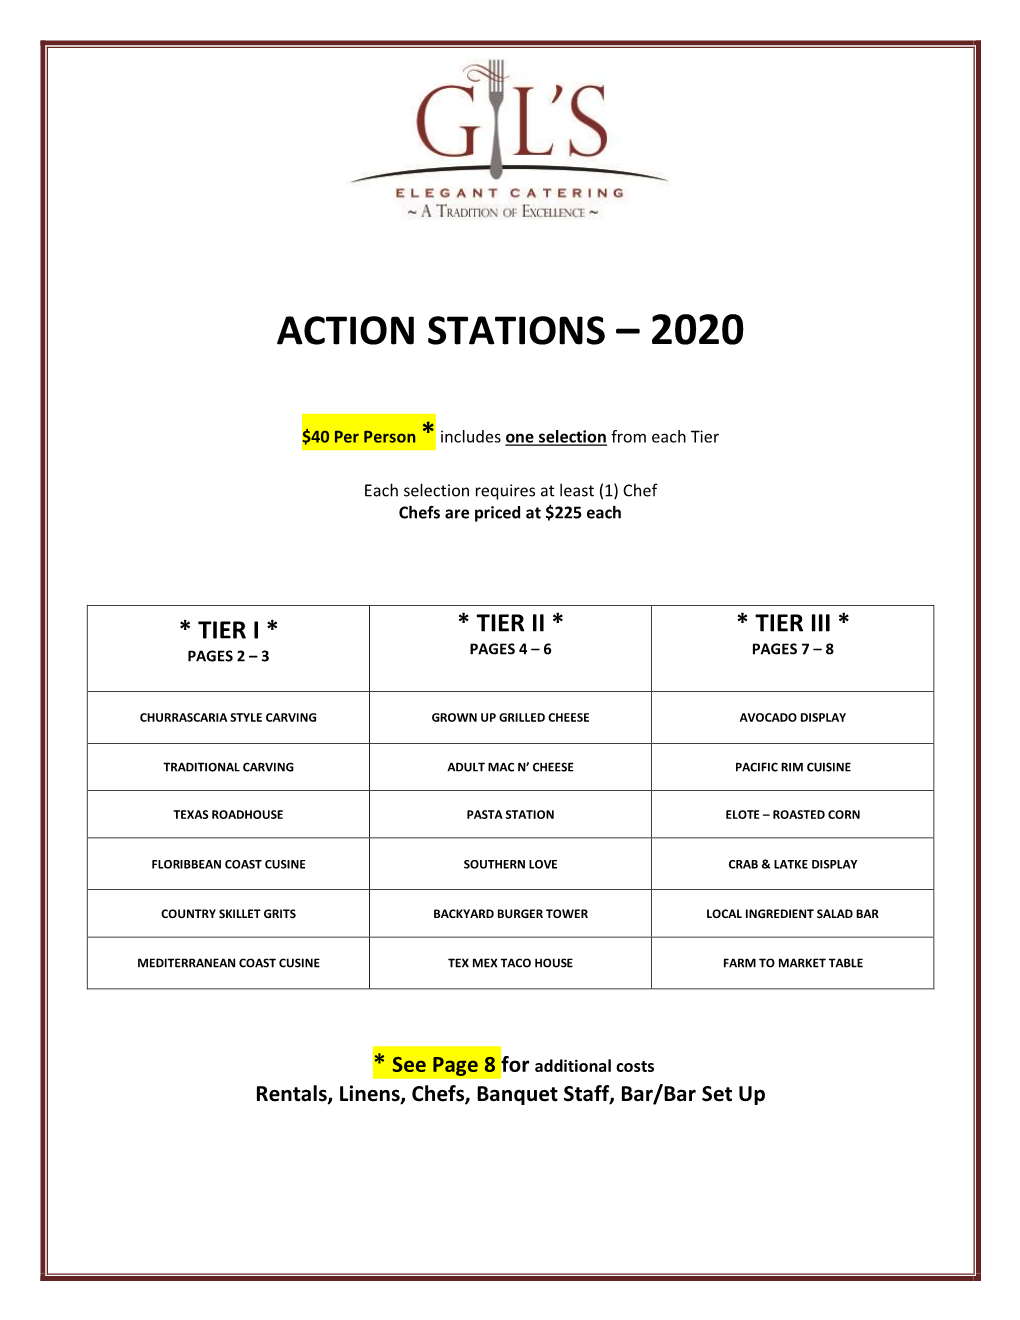 Action Stations – 2020